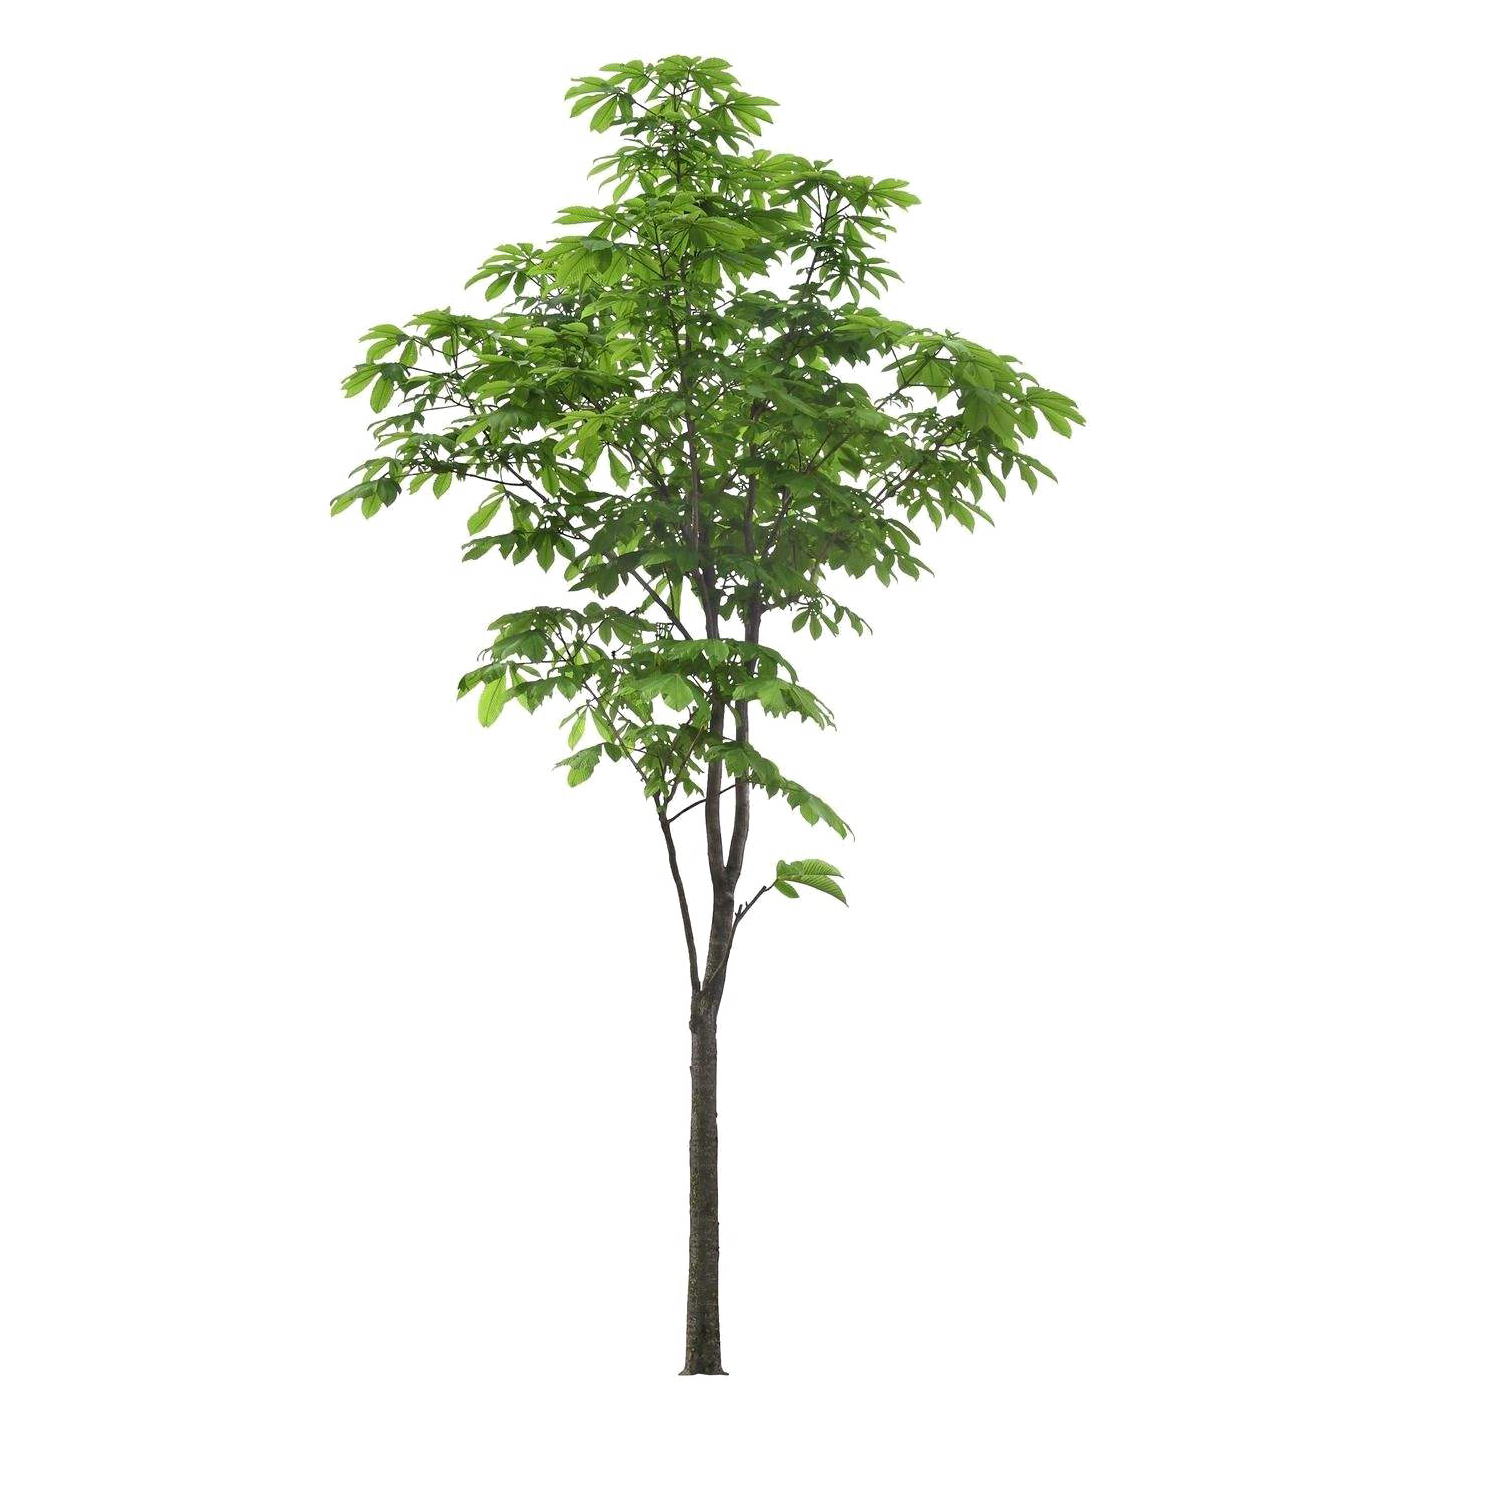 Foreground Tree Landscape Free Transparent Image HQ Clipart